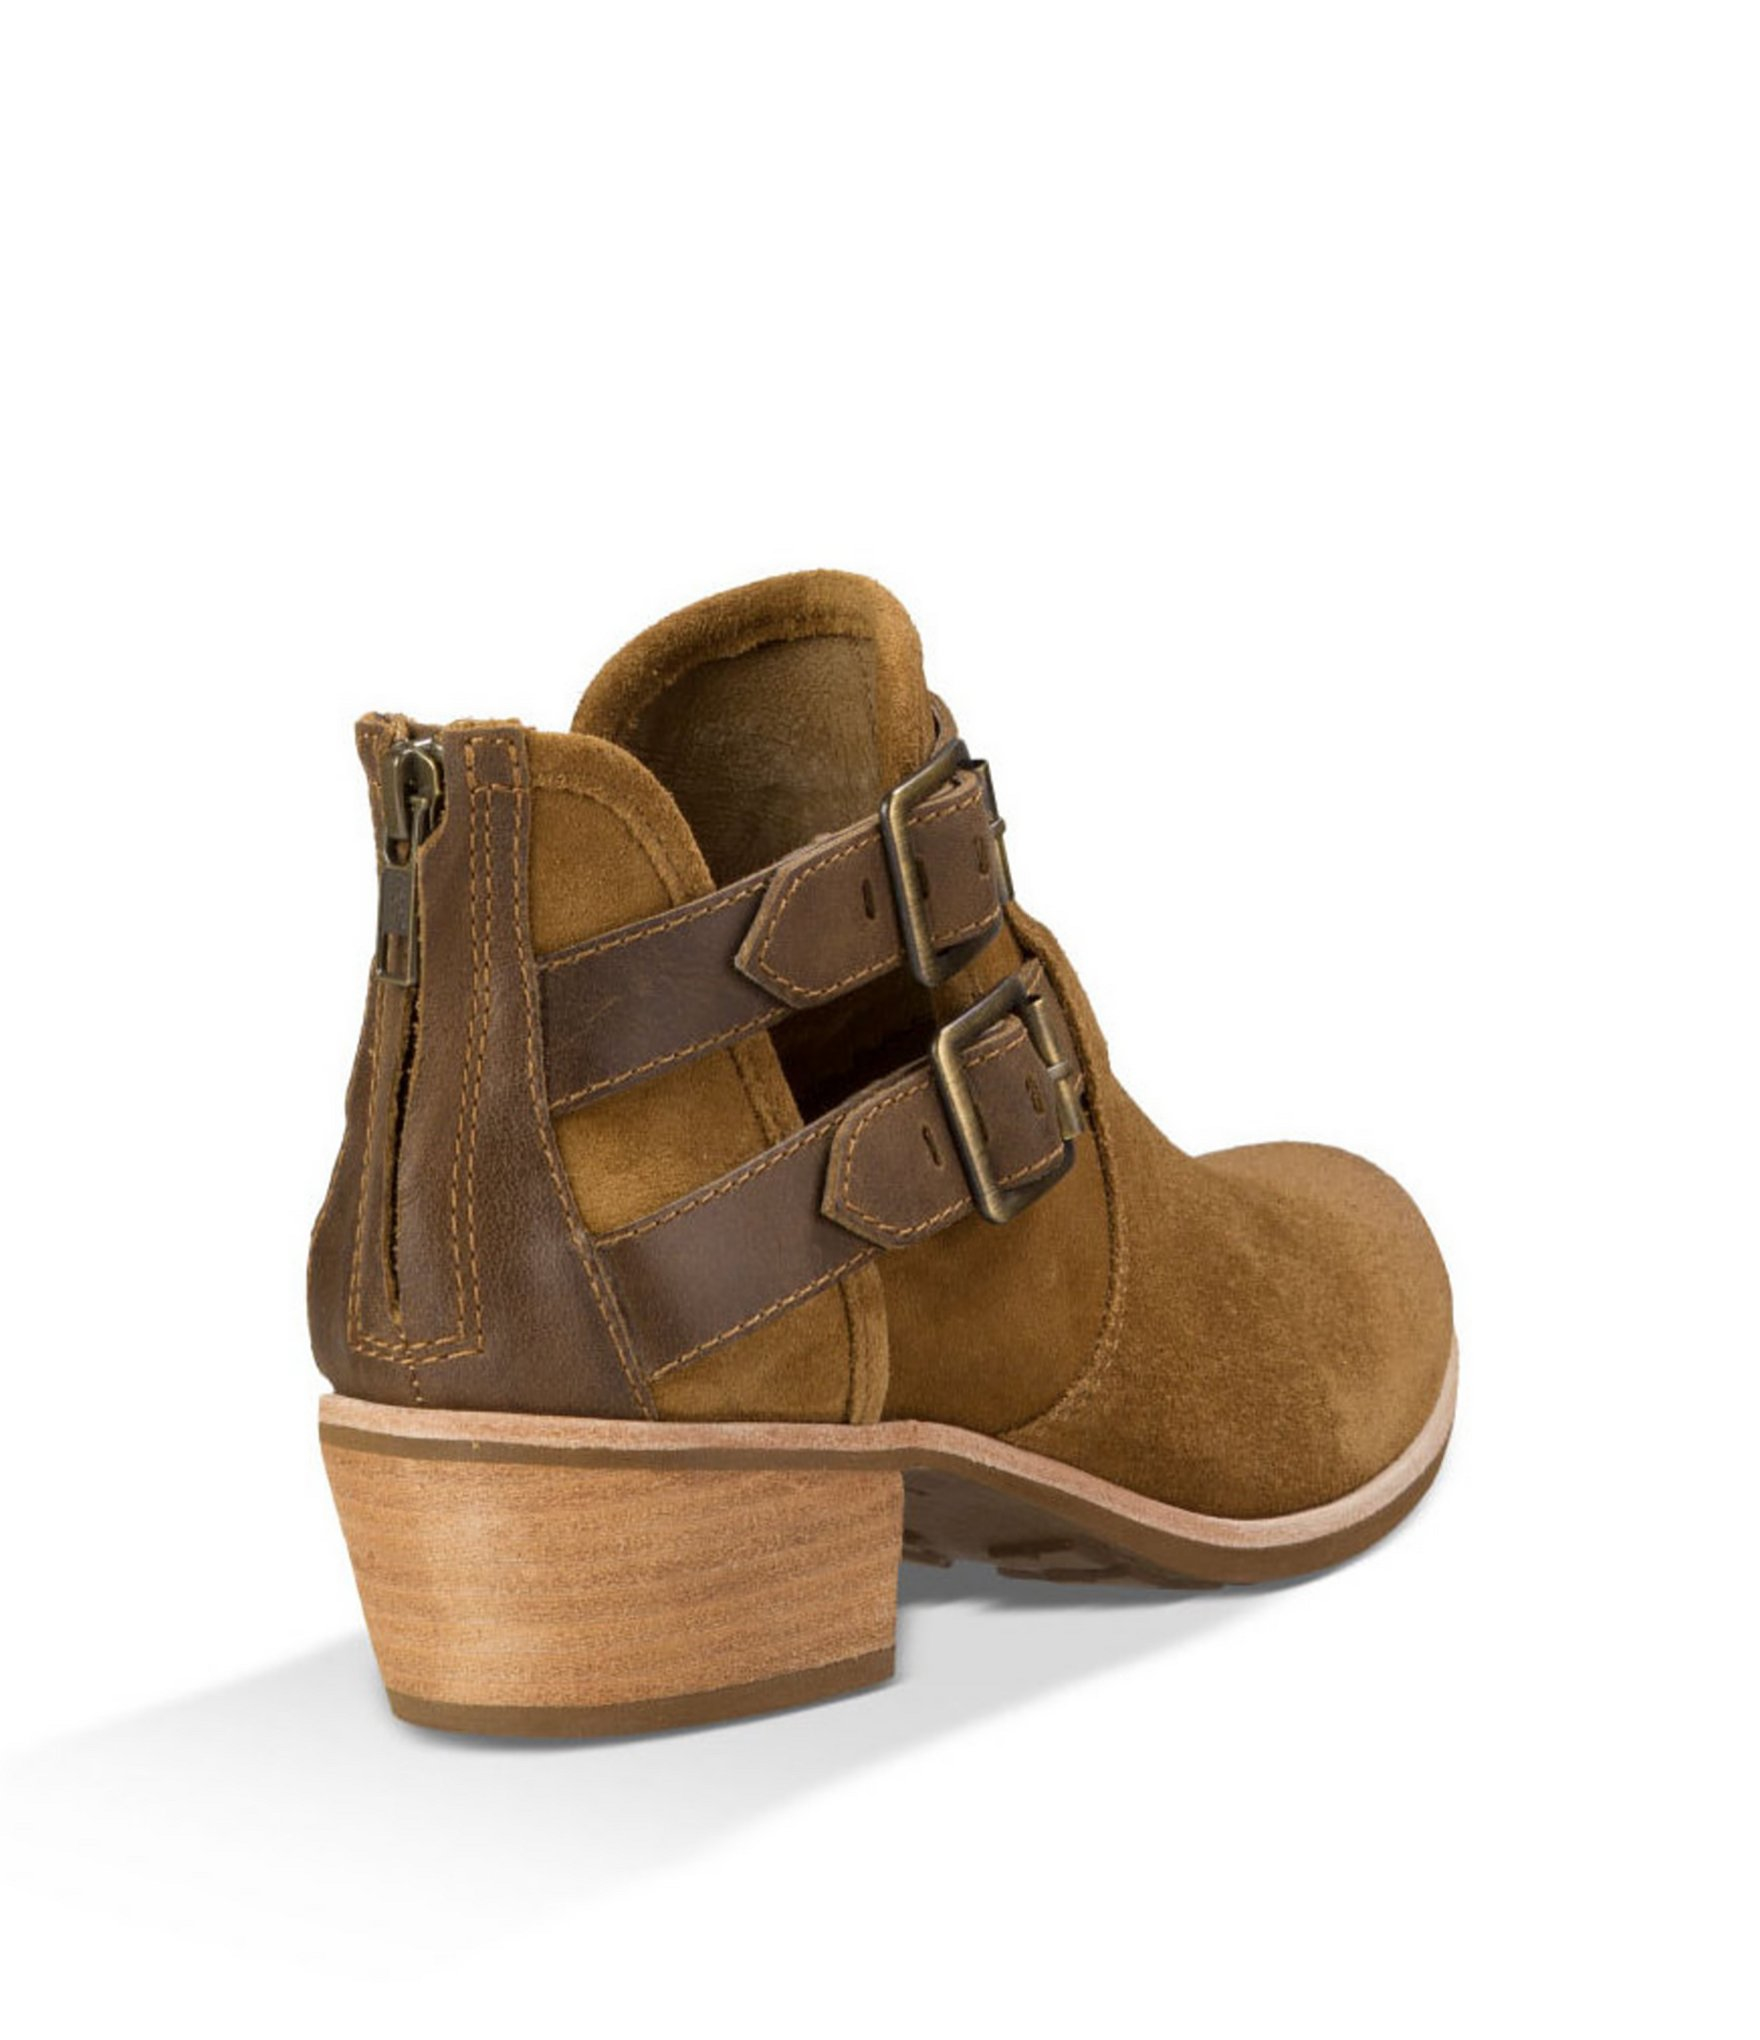 Lyst - Ugg ® Patsy Booties in Brown